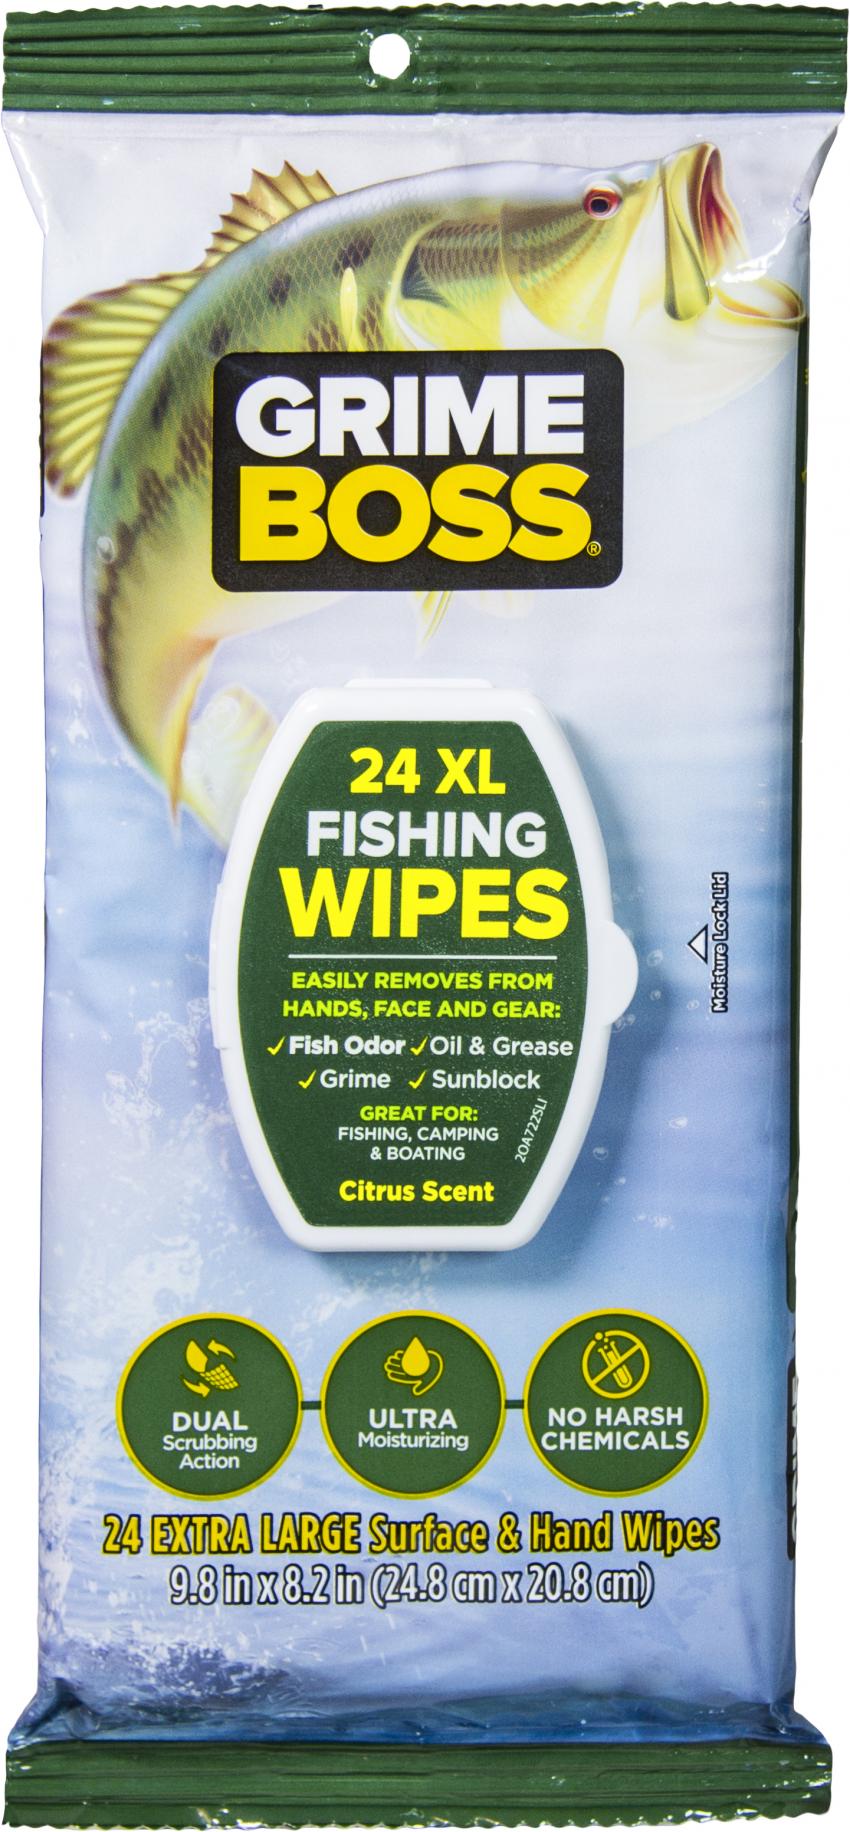 Grime Boss 5 Packs of 5-Count XL Hand Wipes Heavy Duty Cleaning Wipes